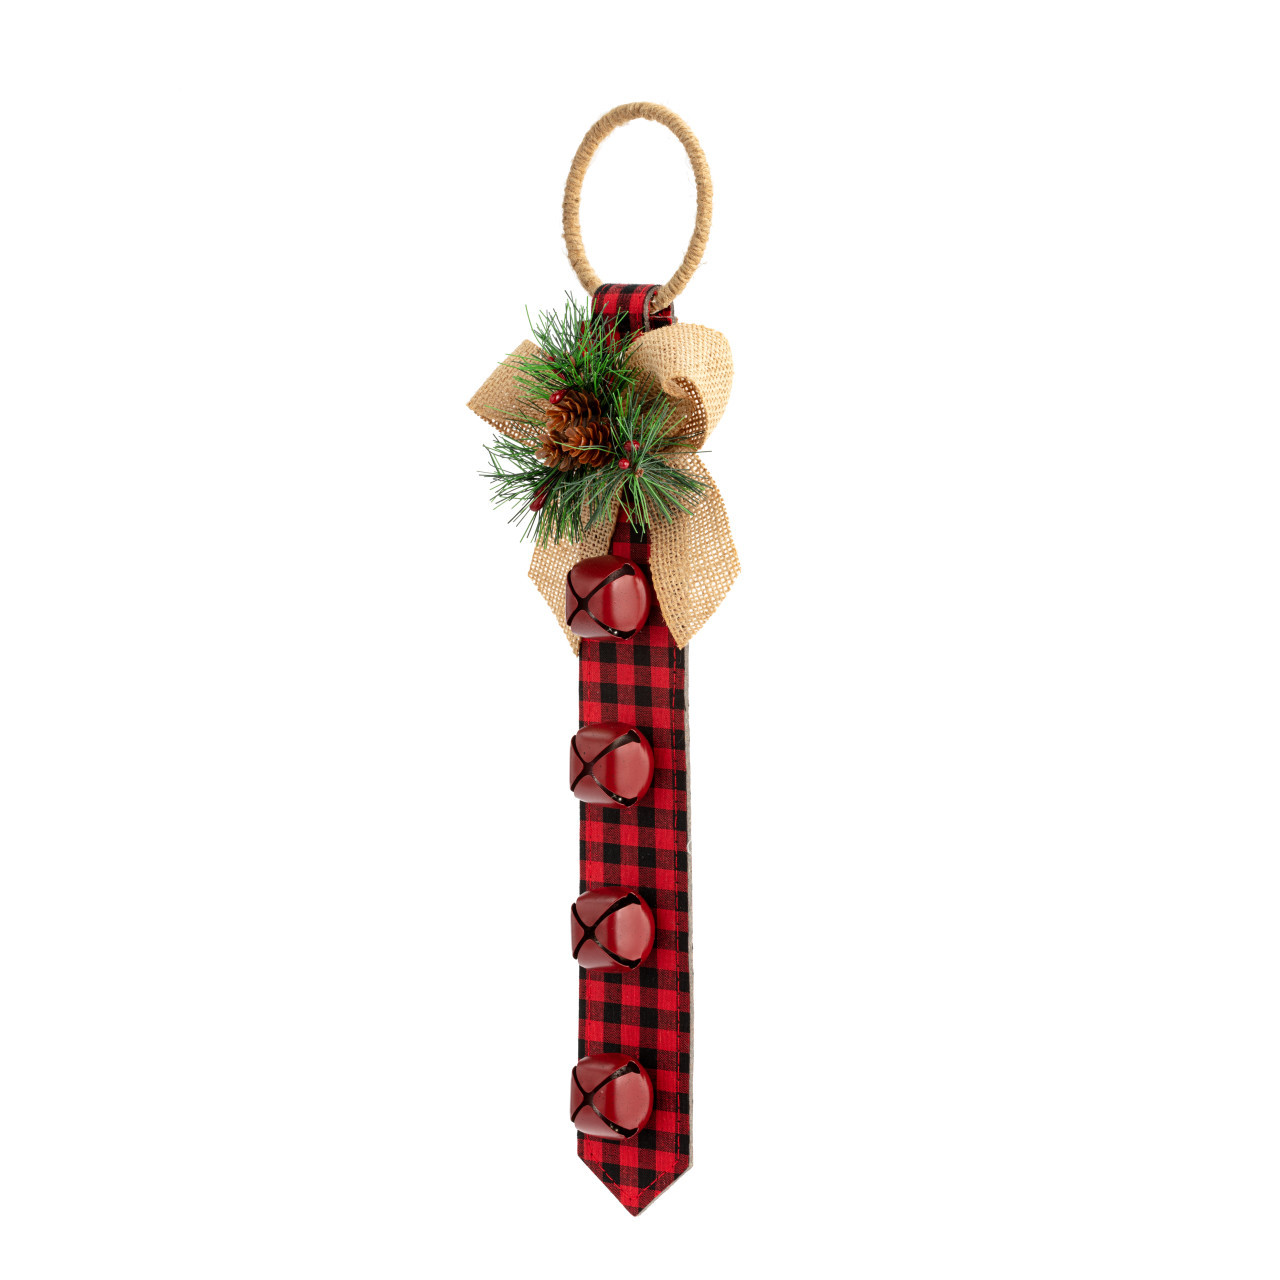 Large Jingle Bells Decoration with Holiday Bow